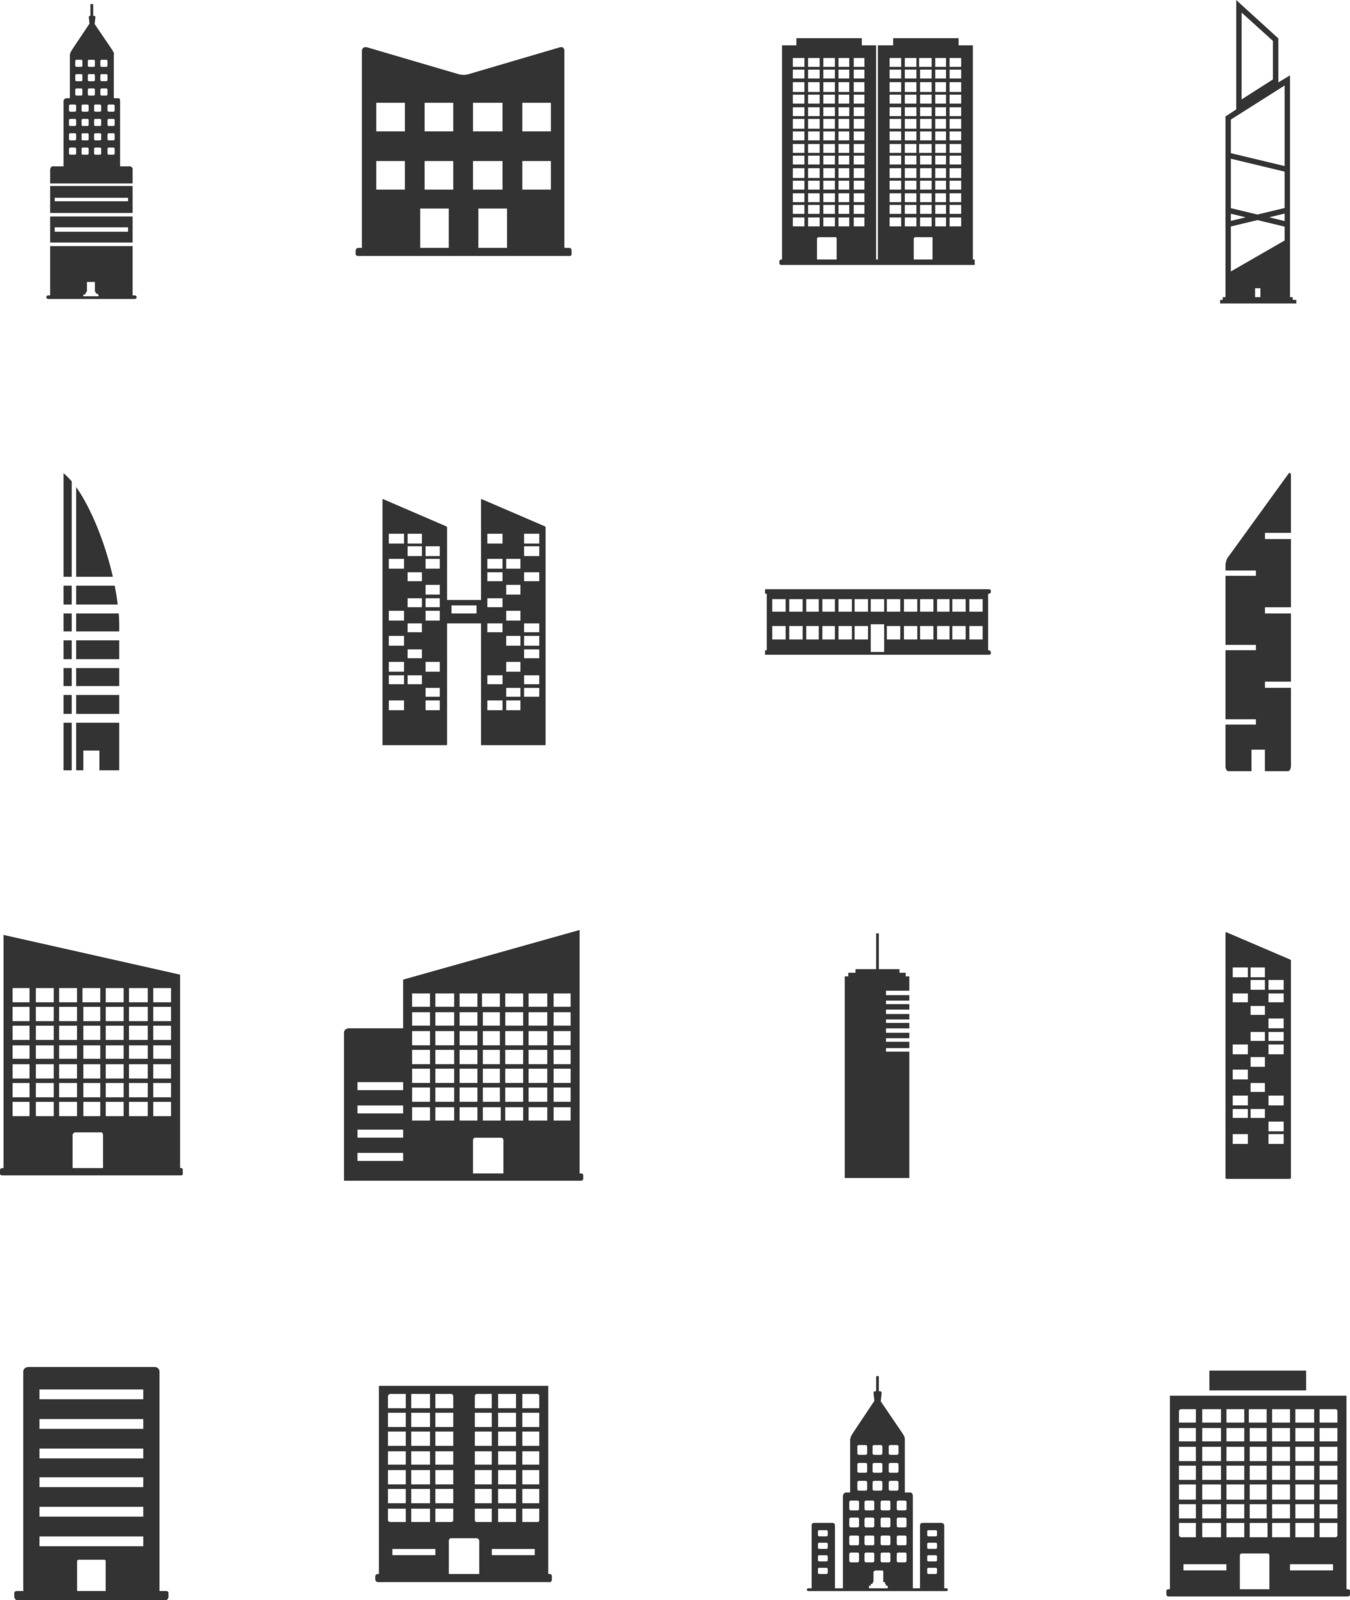 Buildings black silhouette simply icons for web